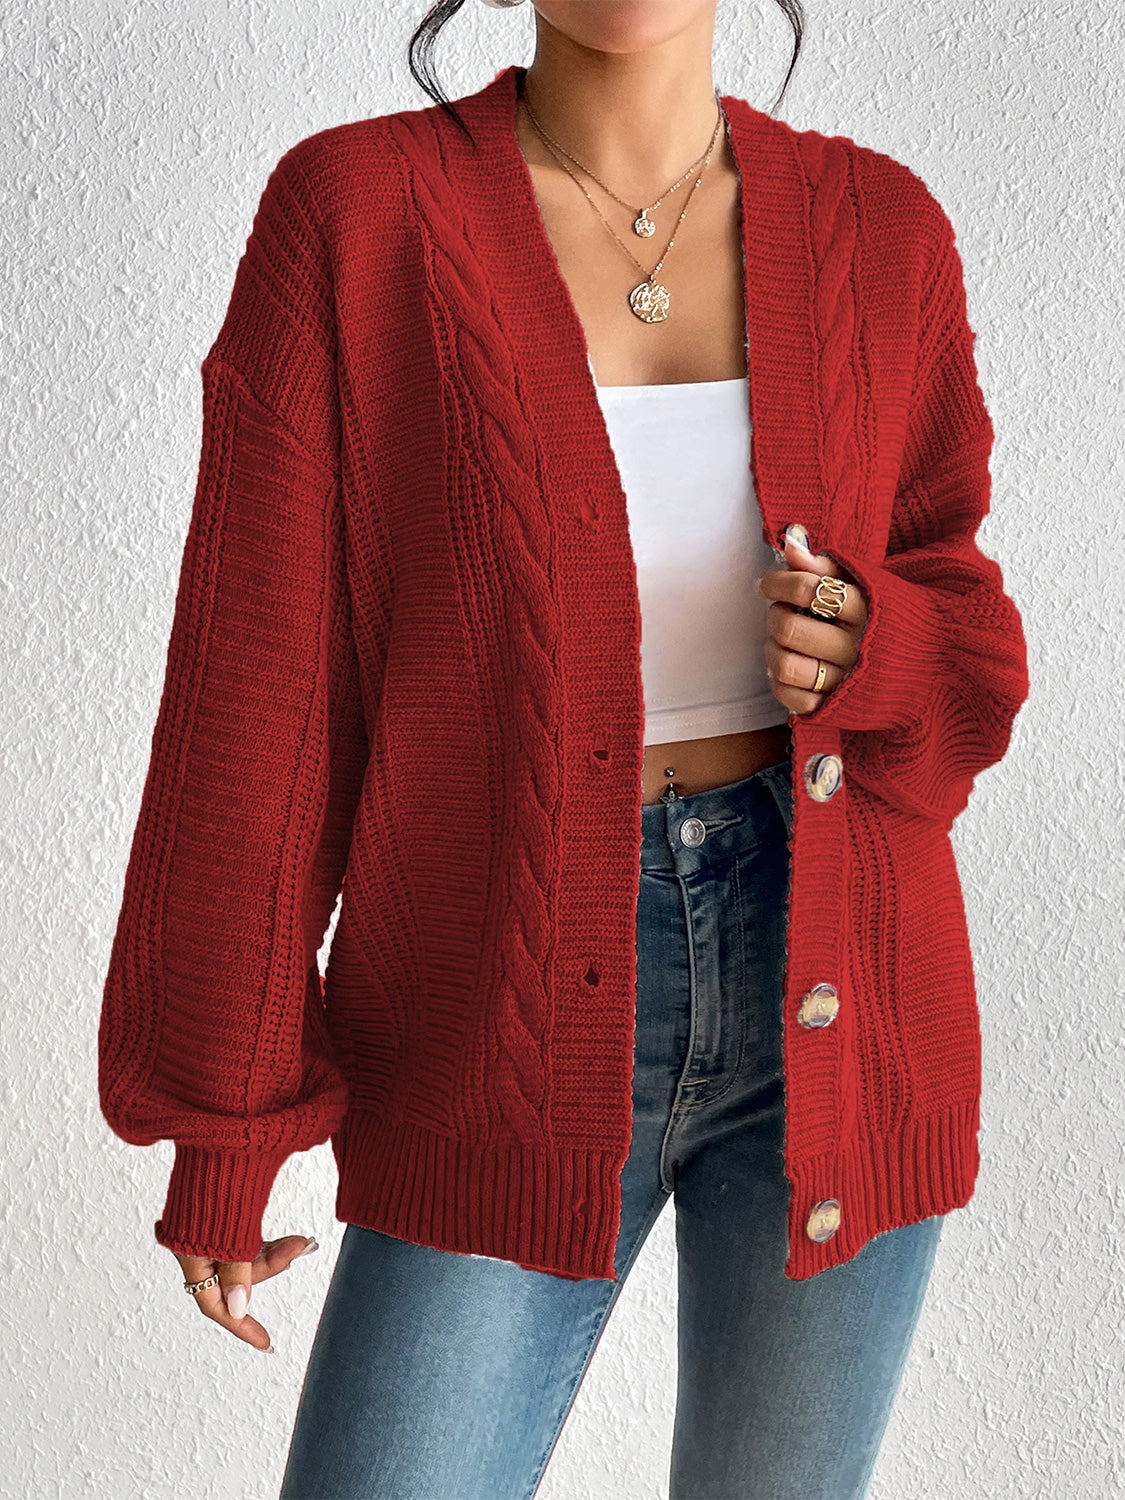 Cable-Knit Button Down Cardigan - Women’s Clothing & Accessories - Shirts & Tops - 19 - 2024